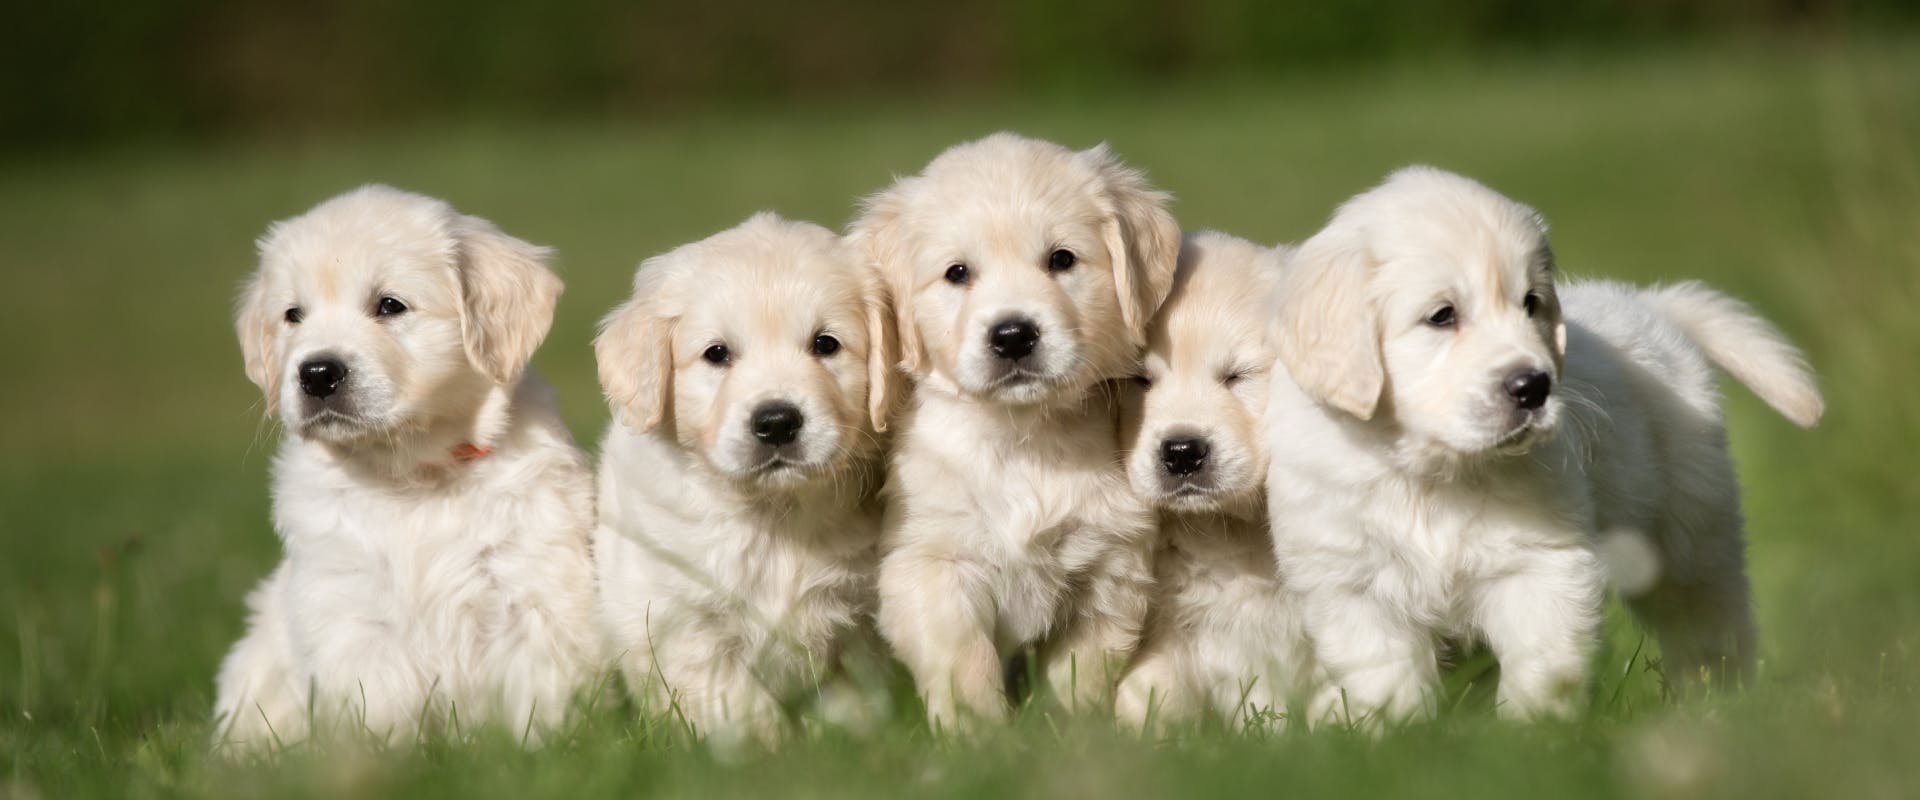 a group of five golden retriever puppies sat together on a patch of grass outside